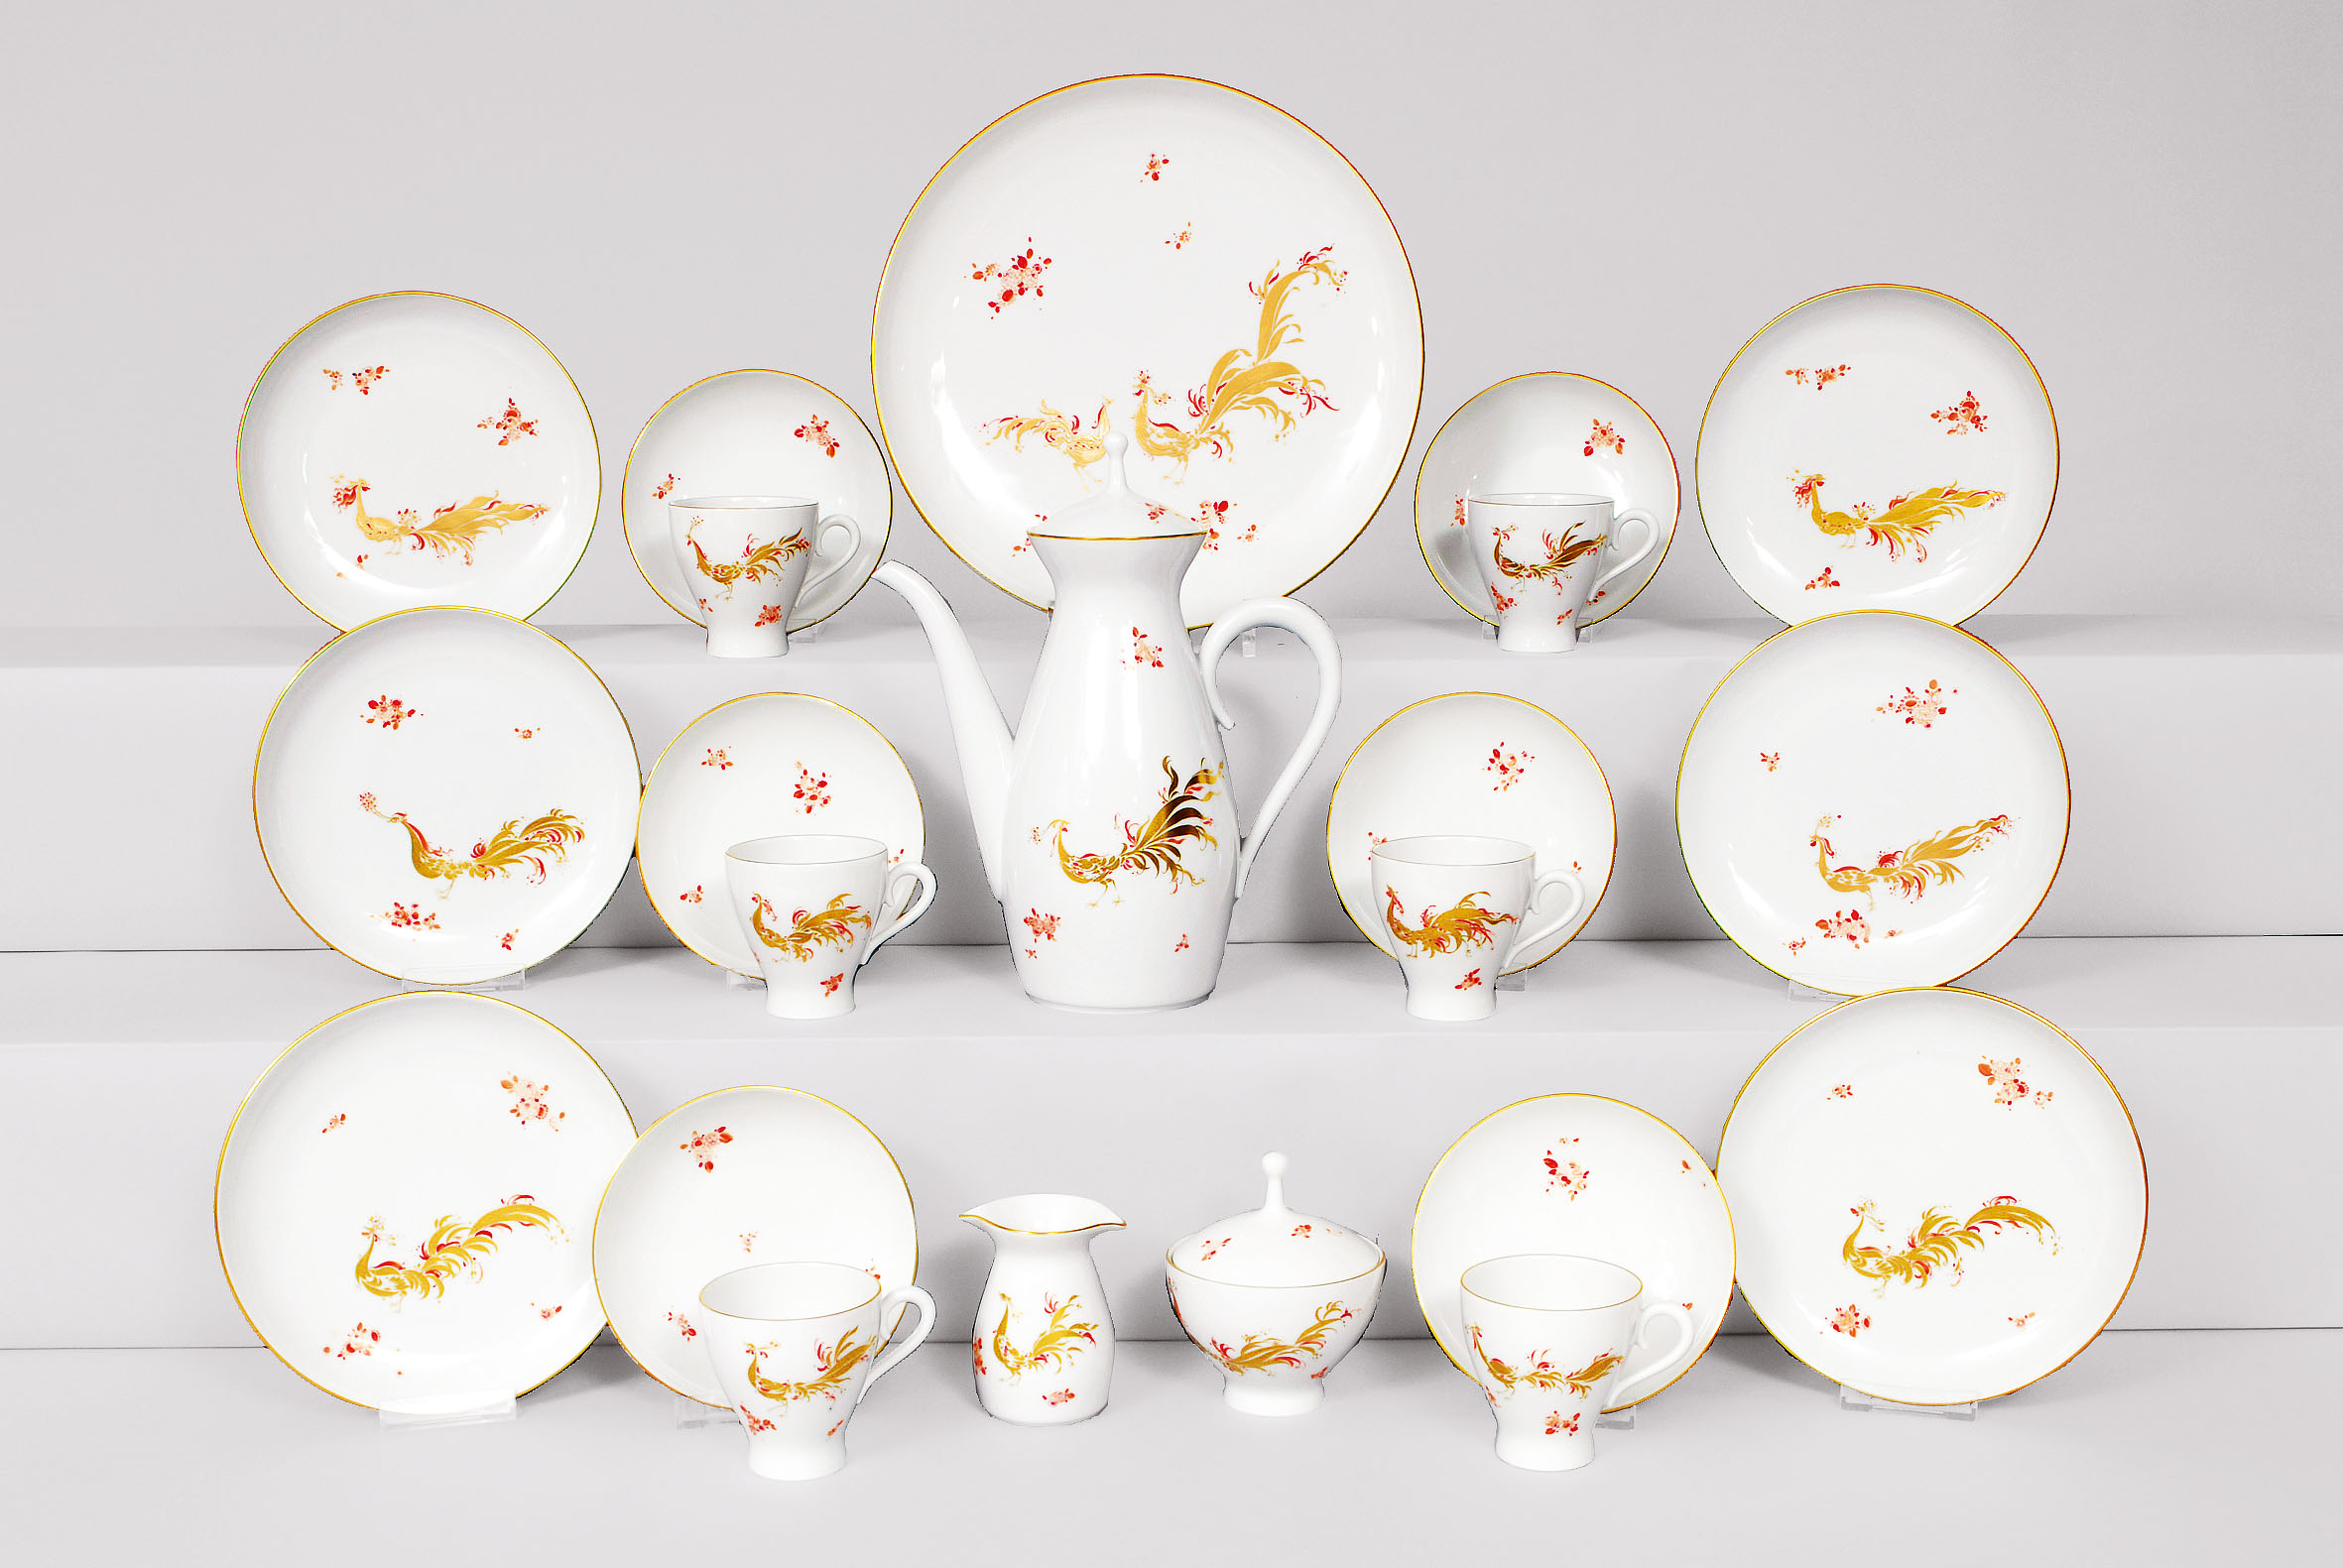 A coffee service 'Prachtvogel' pattern in red and gold